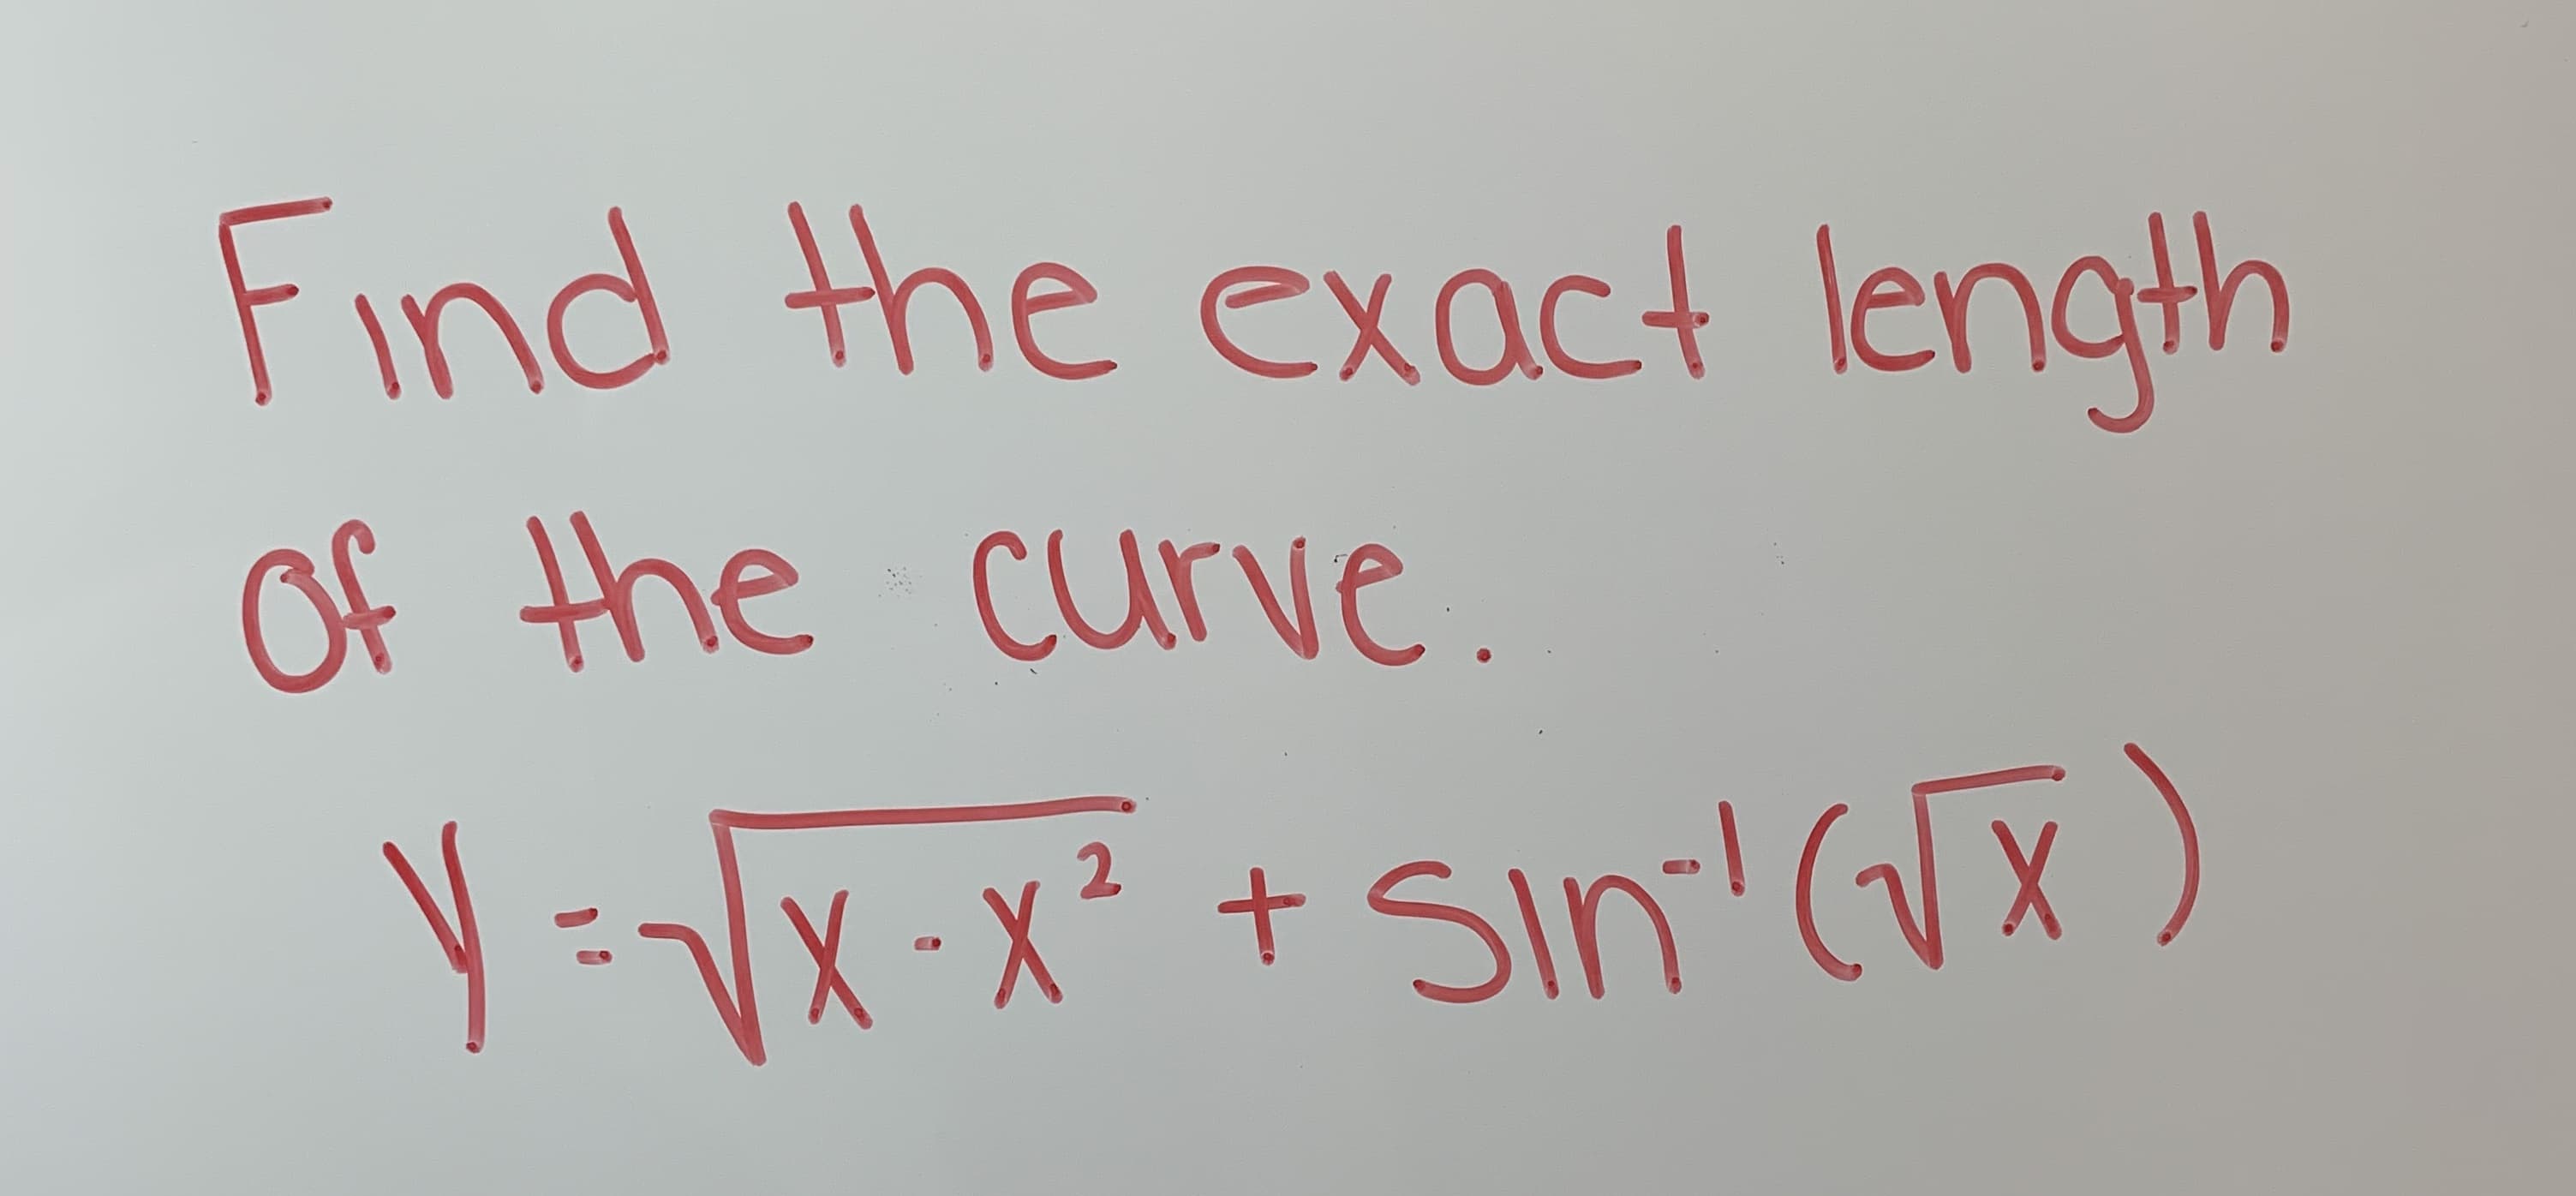 Find the exact length
or the curve
2.
